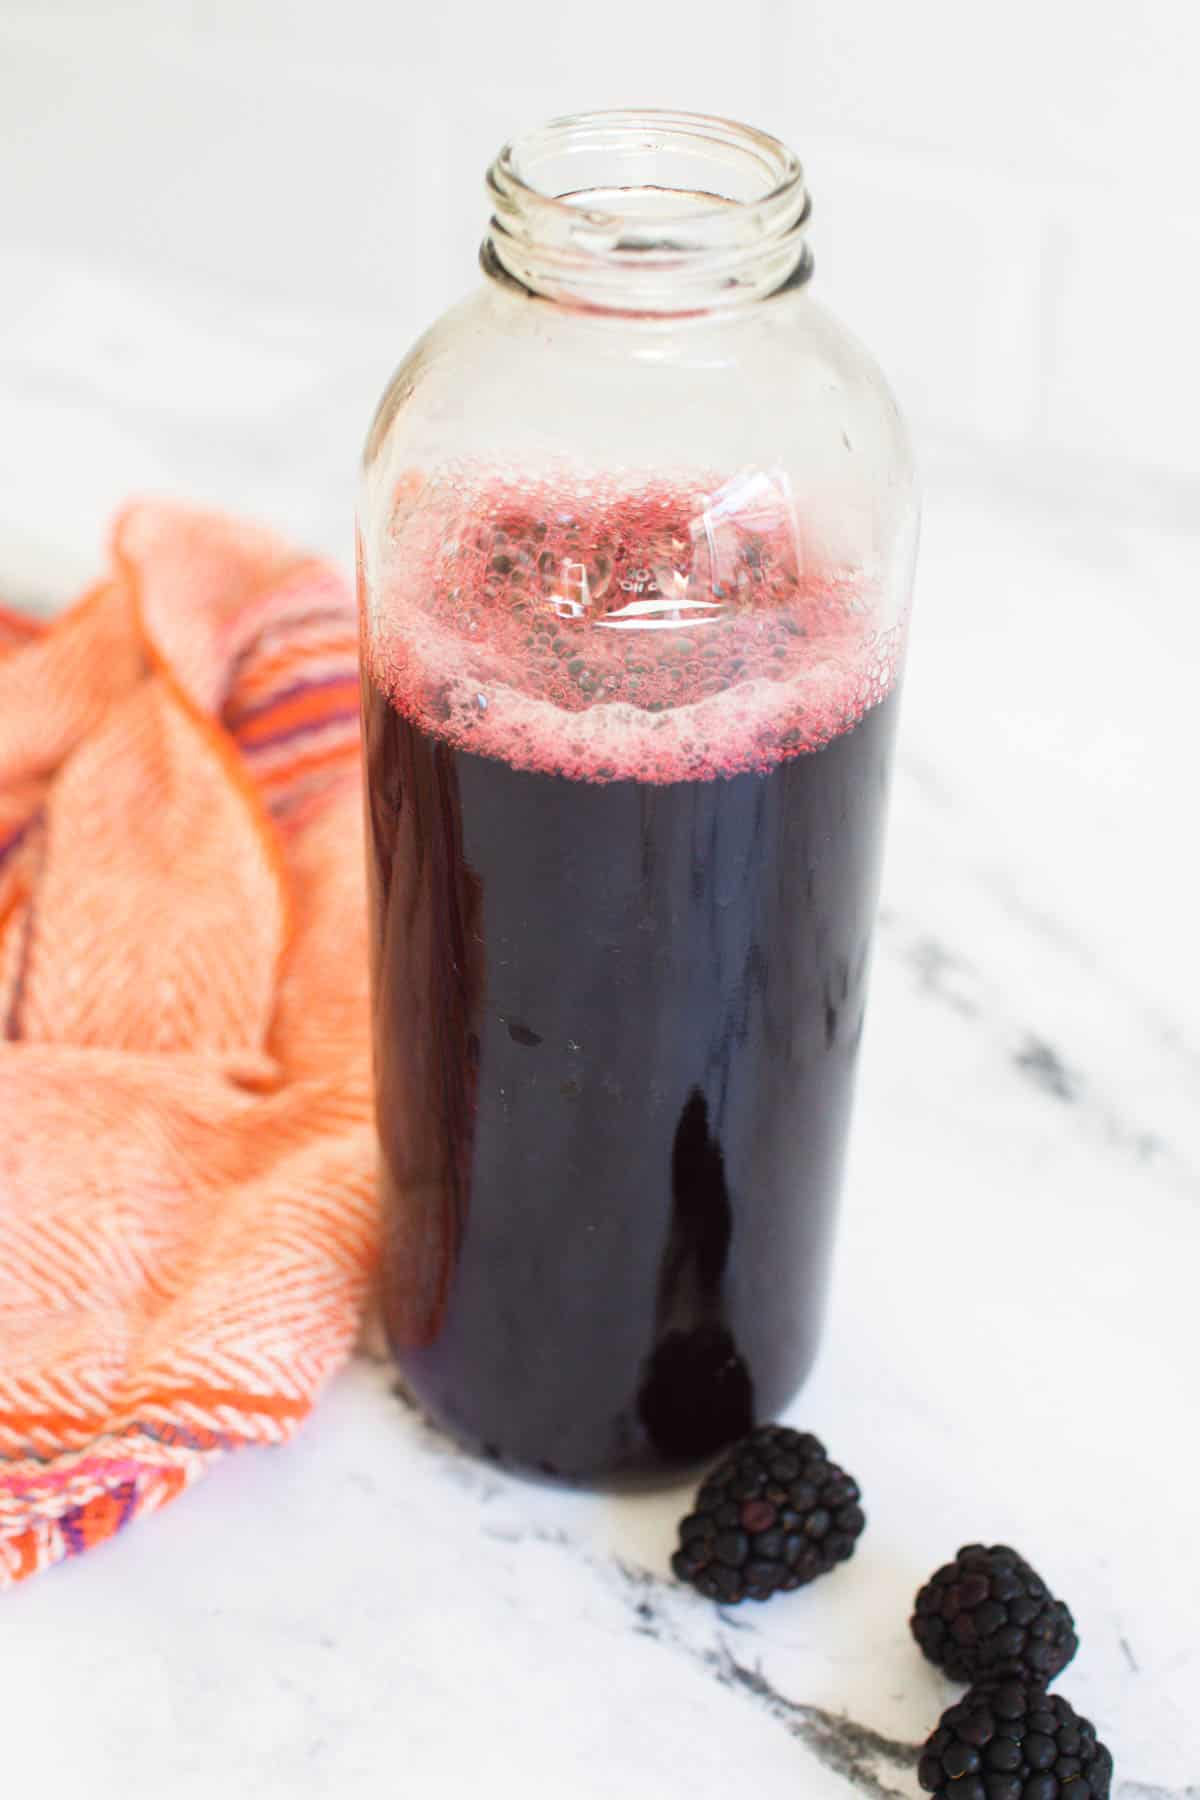 Blackberry cocktail syrup in clear jar on a counter next to fresh berries and a cloth napkin.  